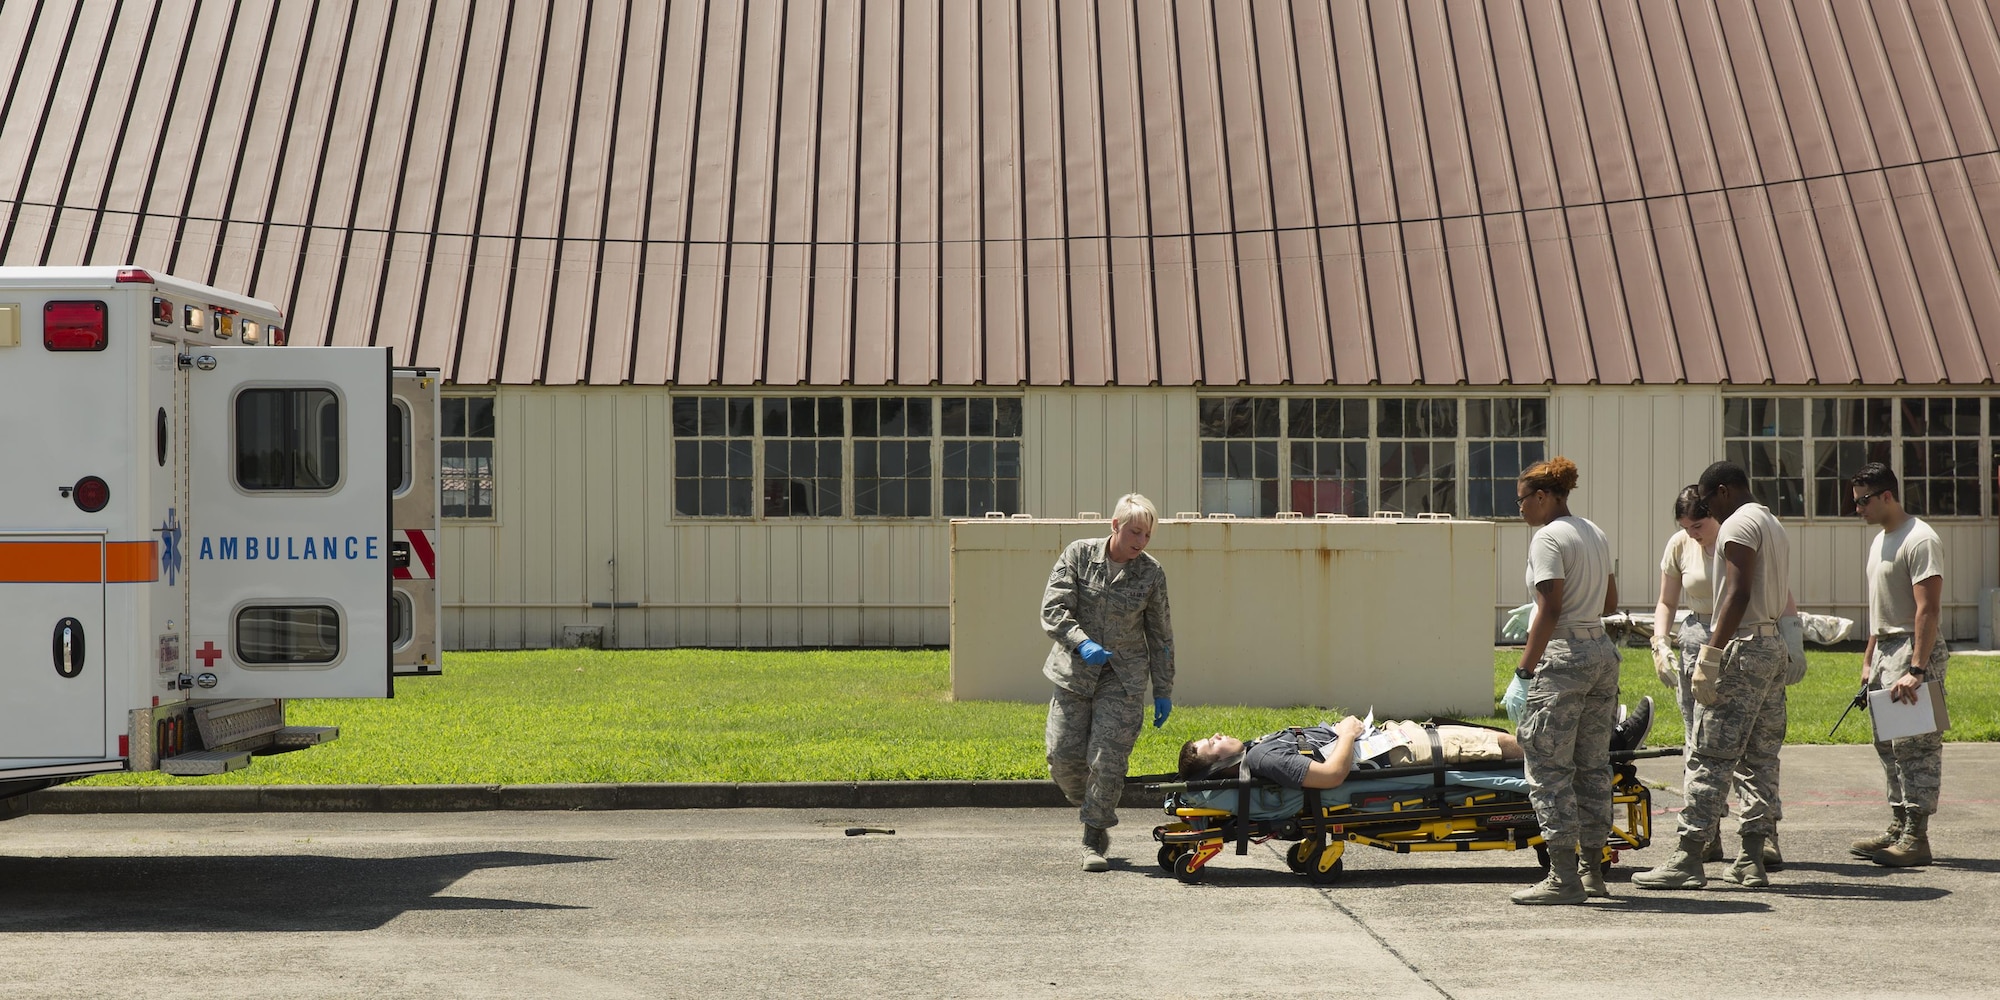 First responders from the 374th Medical Group prepare to transport a simulated victim onto an ambulance during an Emergency Management Exercise at Yokota Air Base, Japan, July 13 ,2015. The EME trained Yokota for possible real-world situations requiring response and communication between on-base organizations. (U.S. Air Force photo by Osakabe Yasuo/Released)